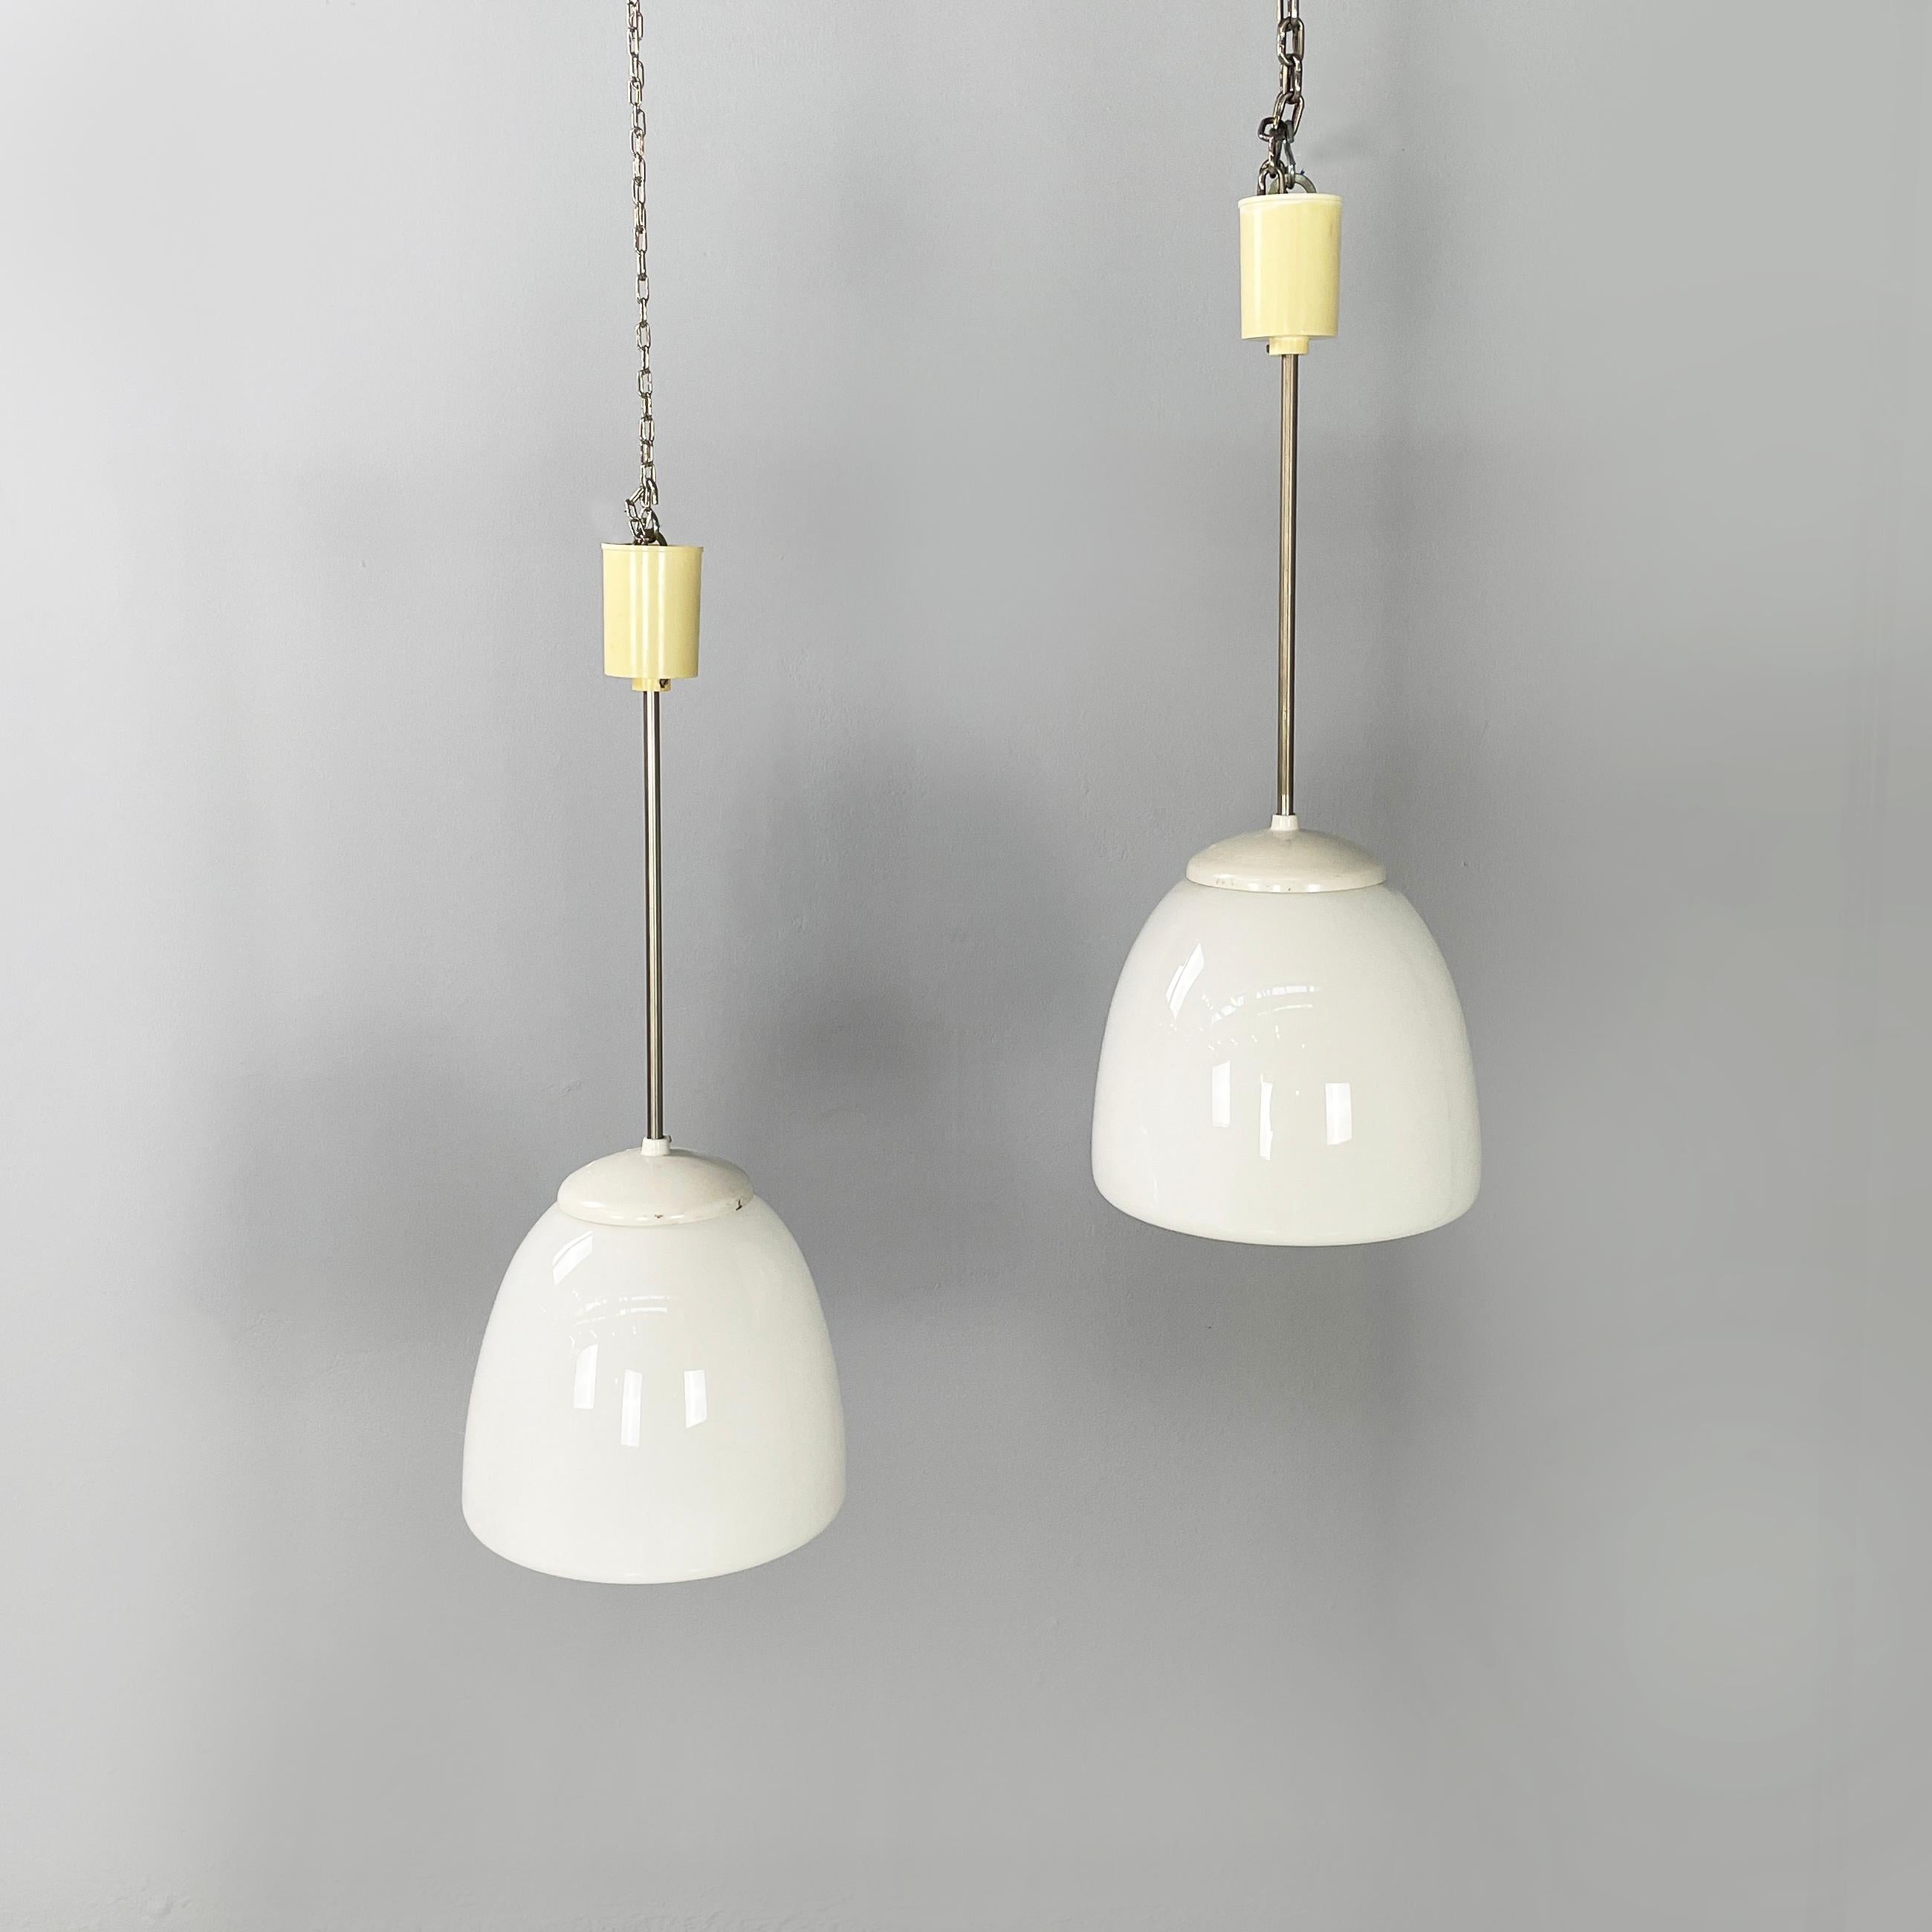 German Bauhaus style Chandelier in opaline glass, white plastic and metal, 1920s
Pair of chandeliers with dome diffuser entirely in opaline glass. Then round attachment to the structure is in white plastic. The structure of the lamp is made of metal